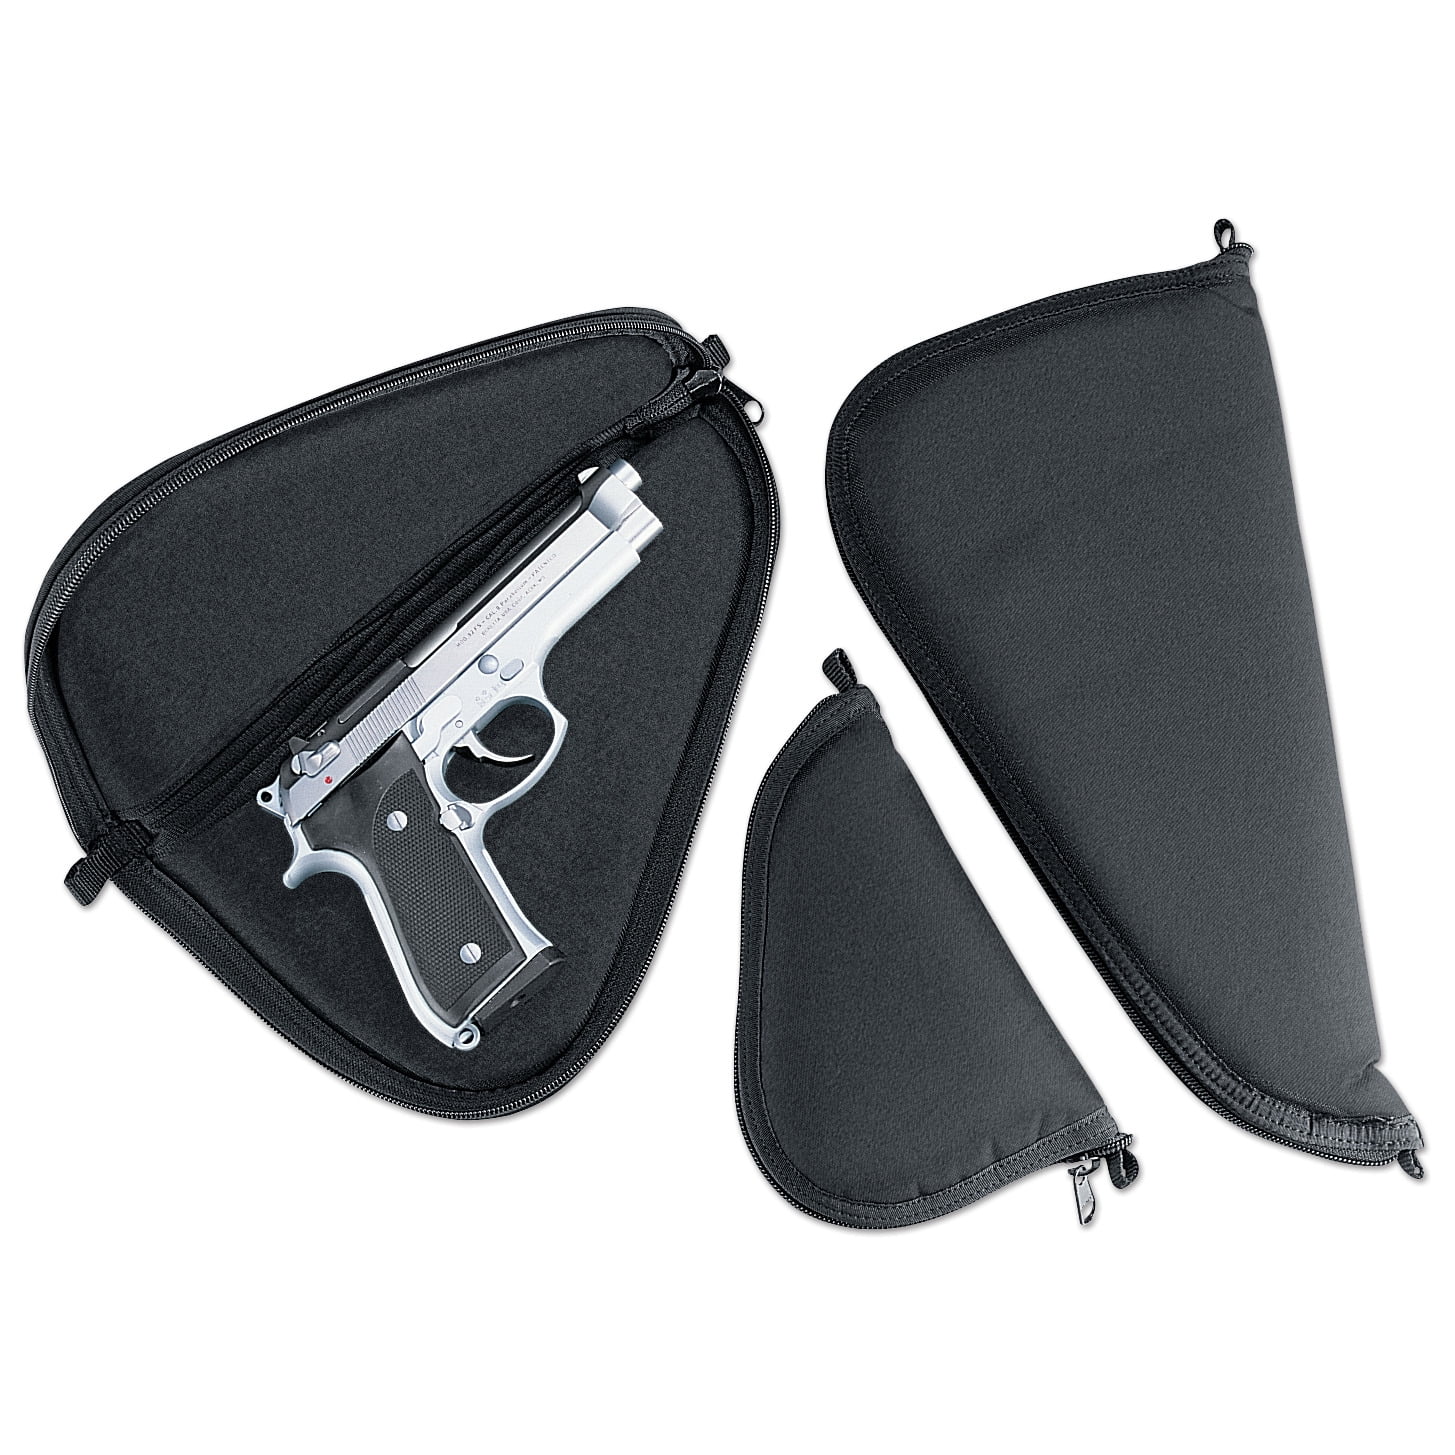 NEW Uncle Mikes Over Under Premium Shotgun Case FREE SHIPPING 